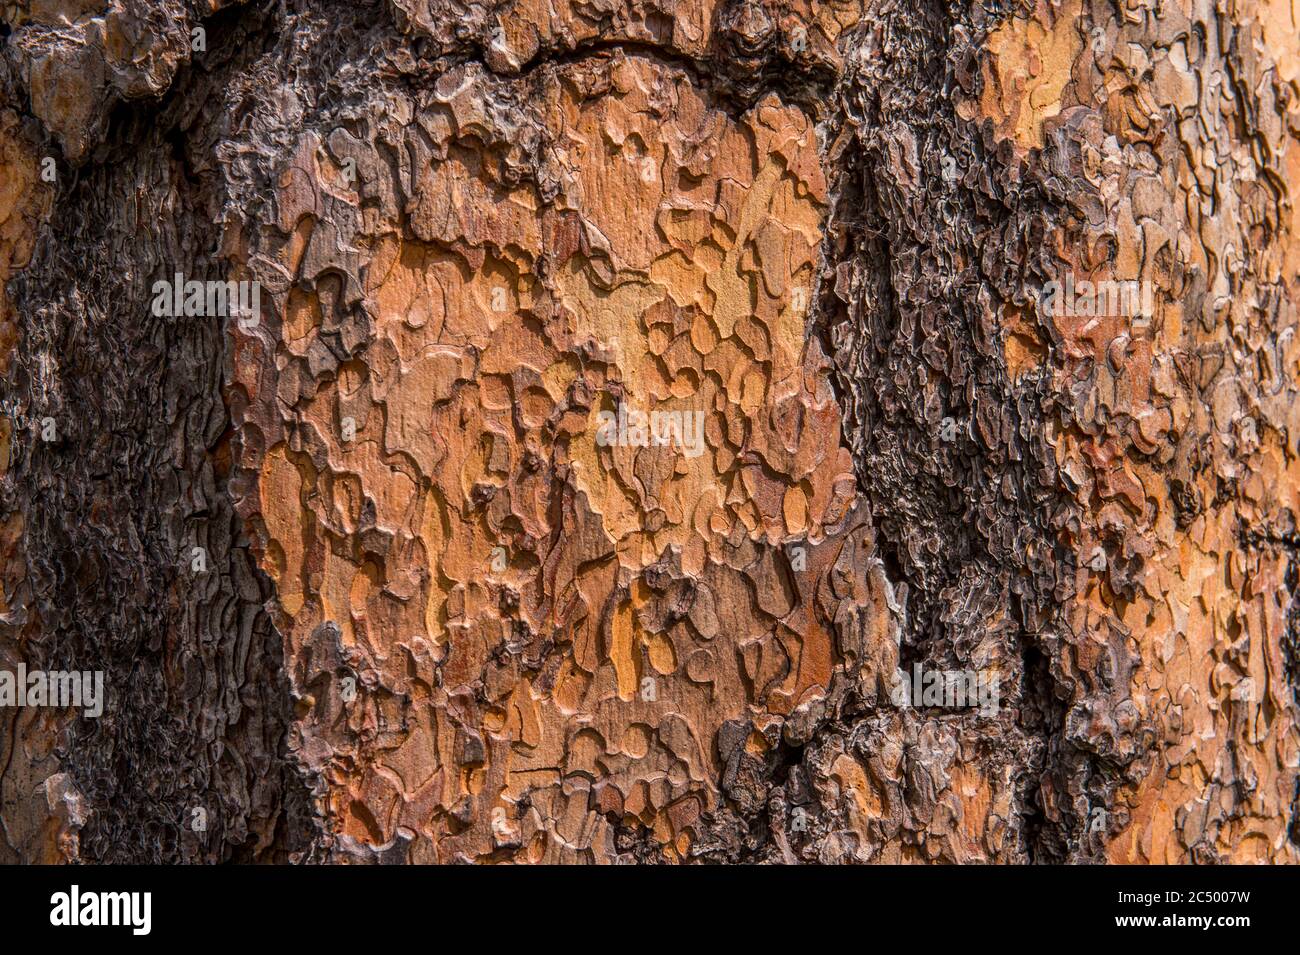 Close-up of the bark of a Ponderosa pine tree in the forest along the Icicle Gorge Trail near Leavenworth, Eastern Washington State, USA. Stock Photo